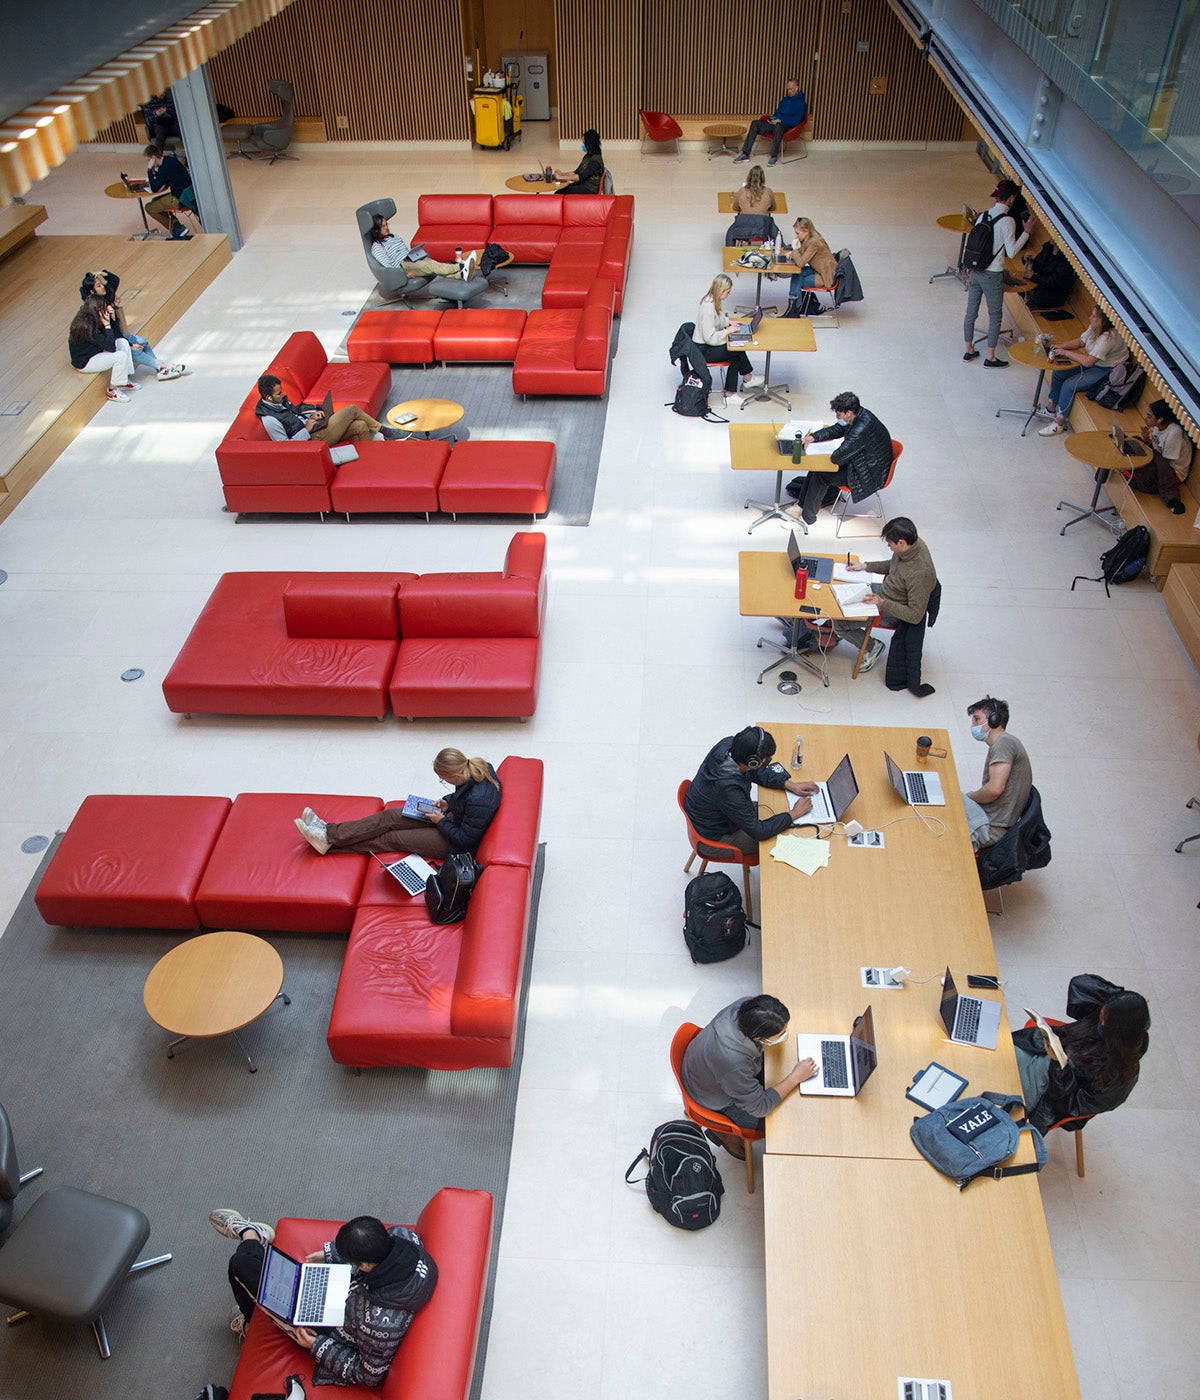 Students study at large tables and on red couches in the student union